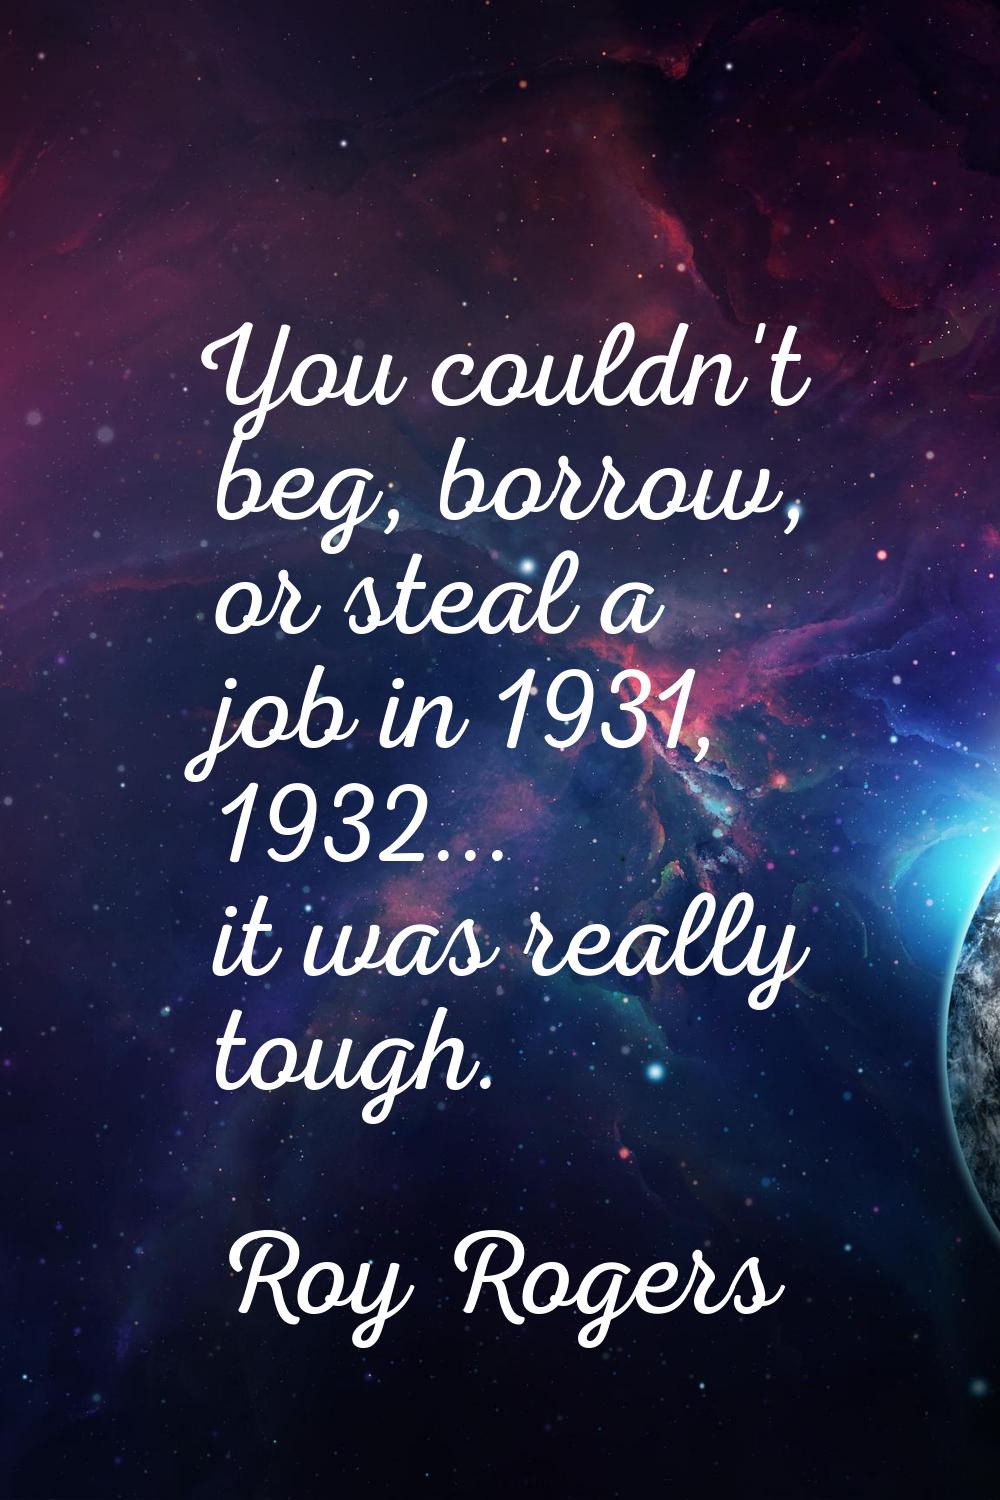 You couldn't beg, borrow, or steal a job in 1931, 1932... it was really tough.